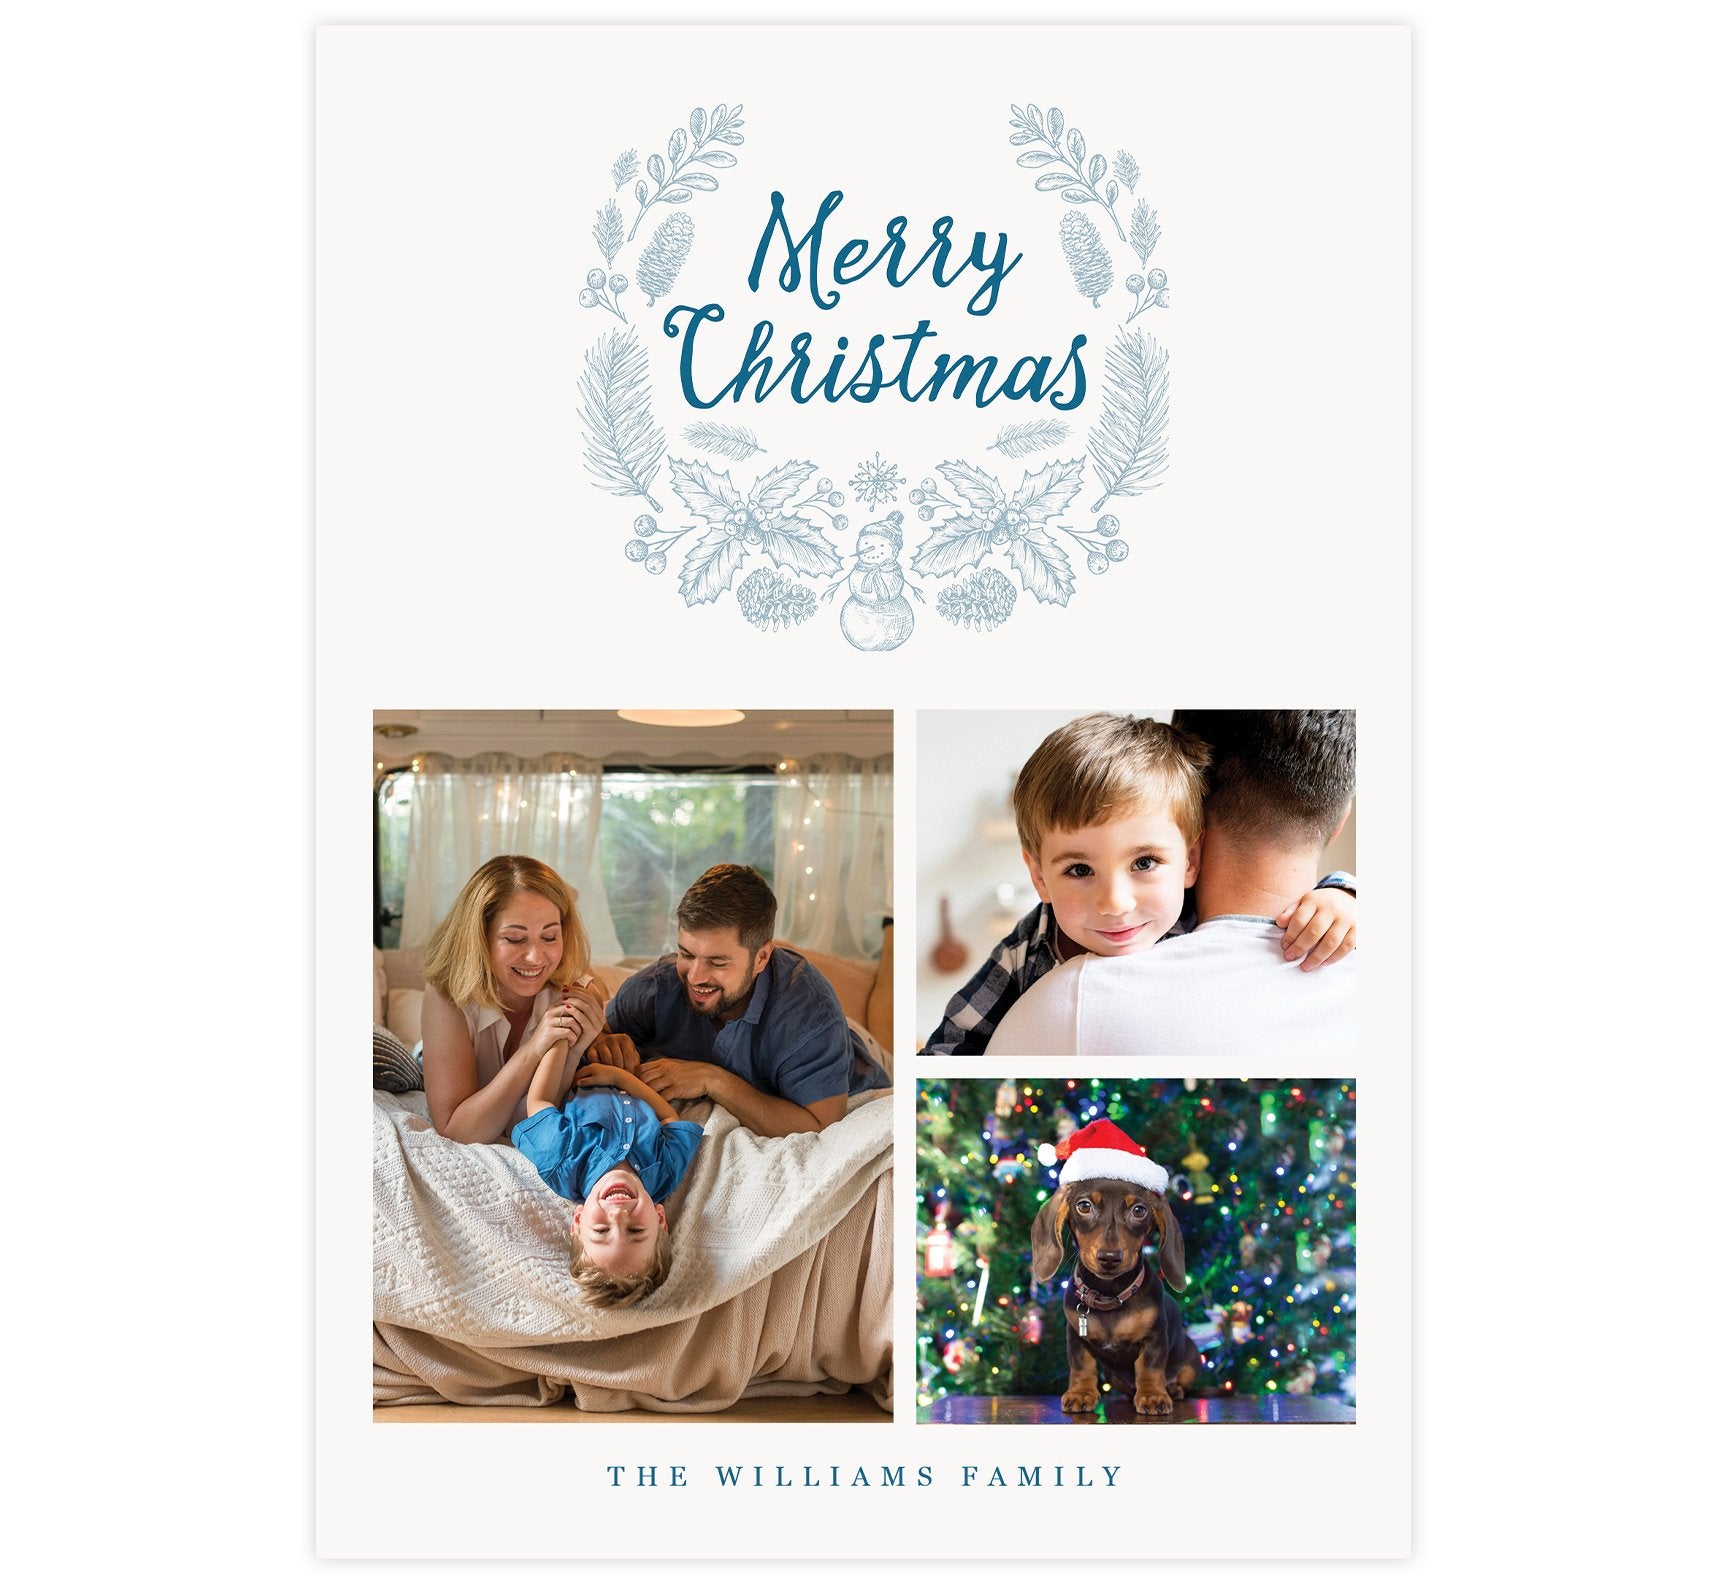 Blue Wreath Holiday Card; Subtle blue background with hand drawn winter elements in a wreath around "Merry Christmas" at the top and 3 image spots below